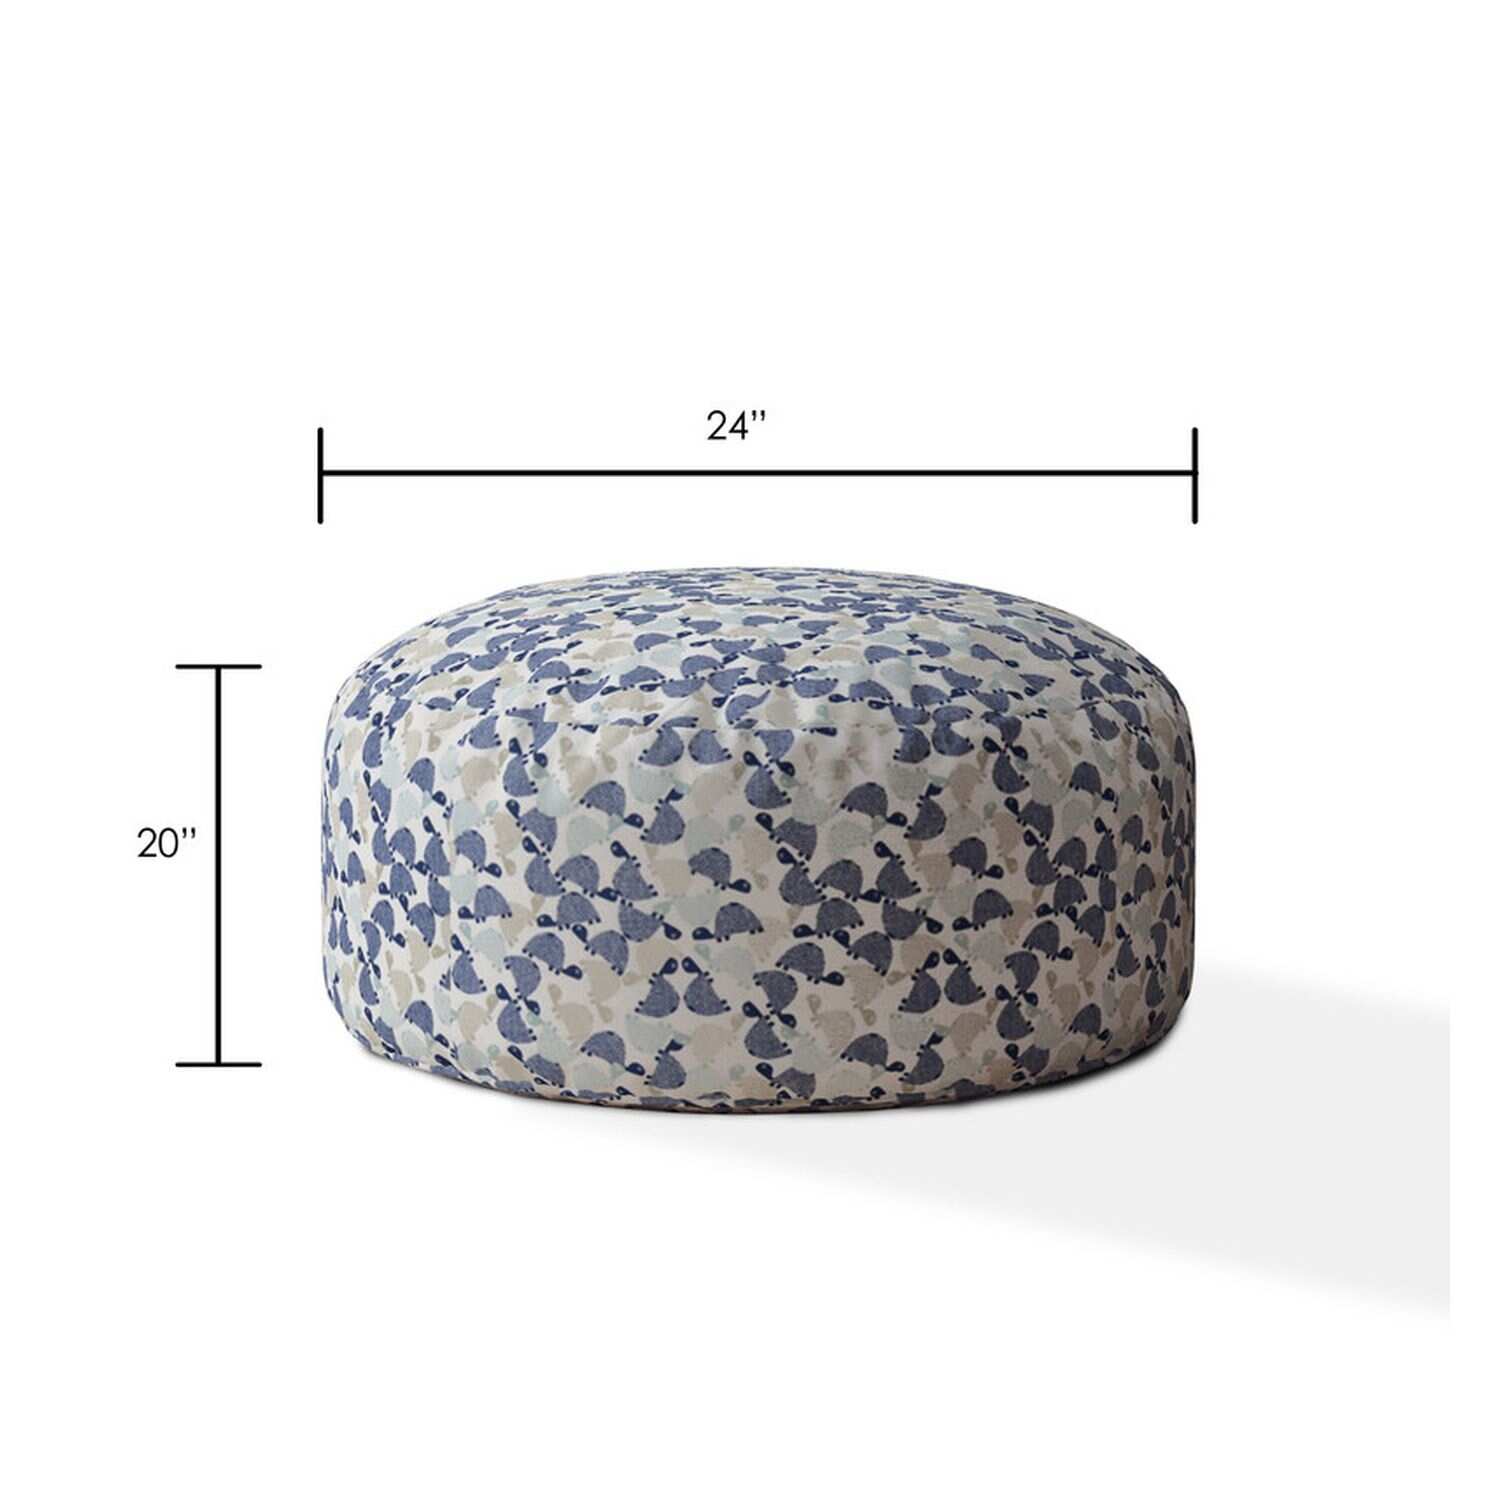 Abstract Short Ottoman Stool Padded Seat with Cotton Fabric and Zipper Pouf Large Storage Bean Bag for Living Room Lounge